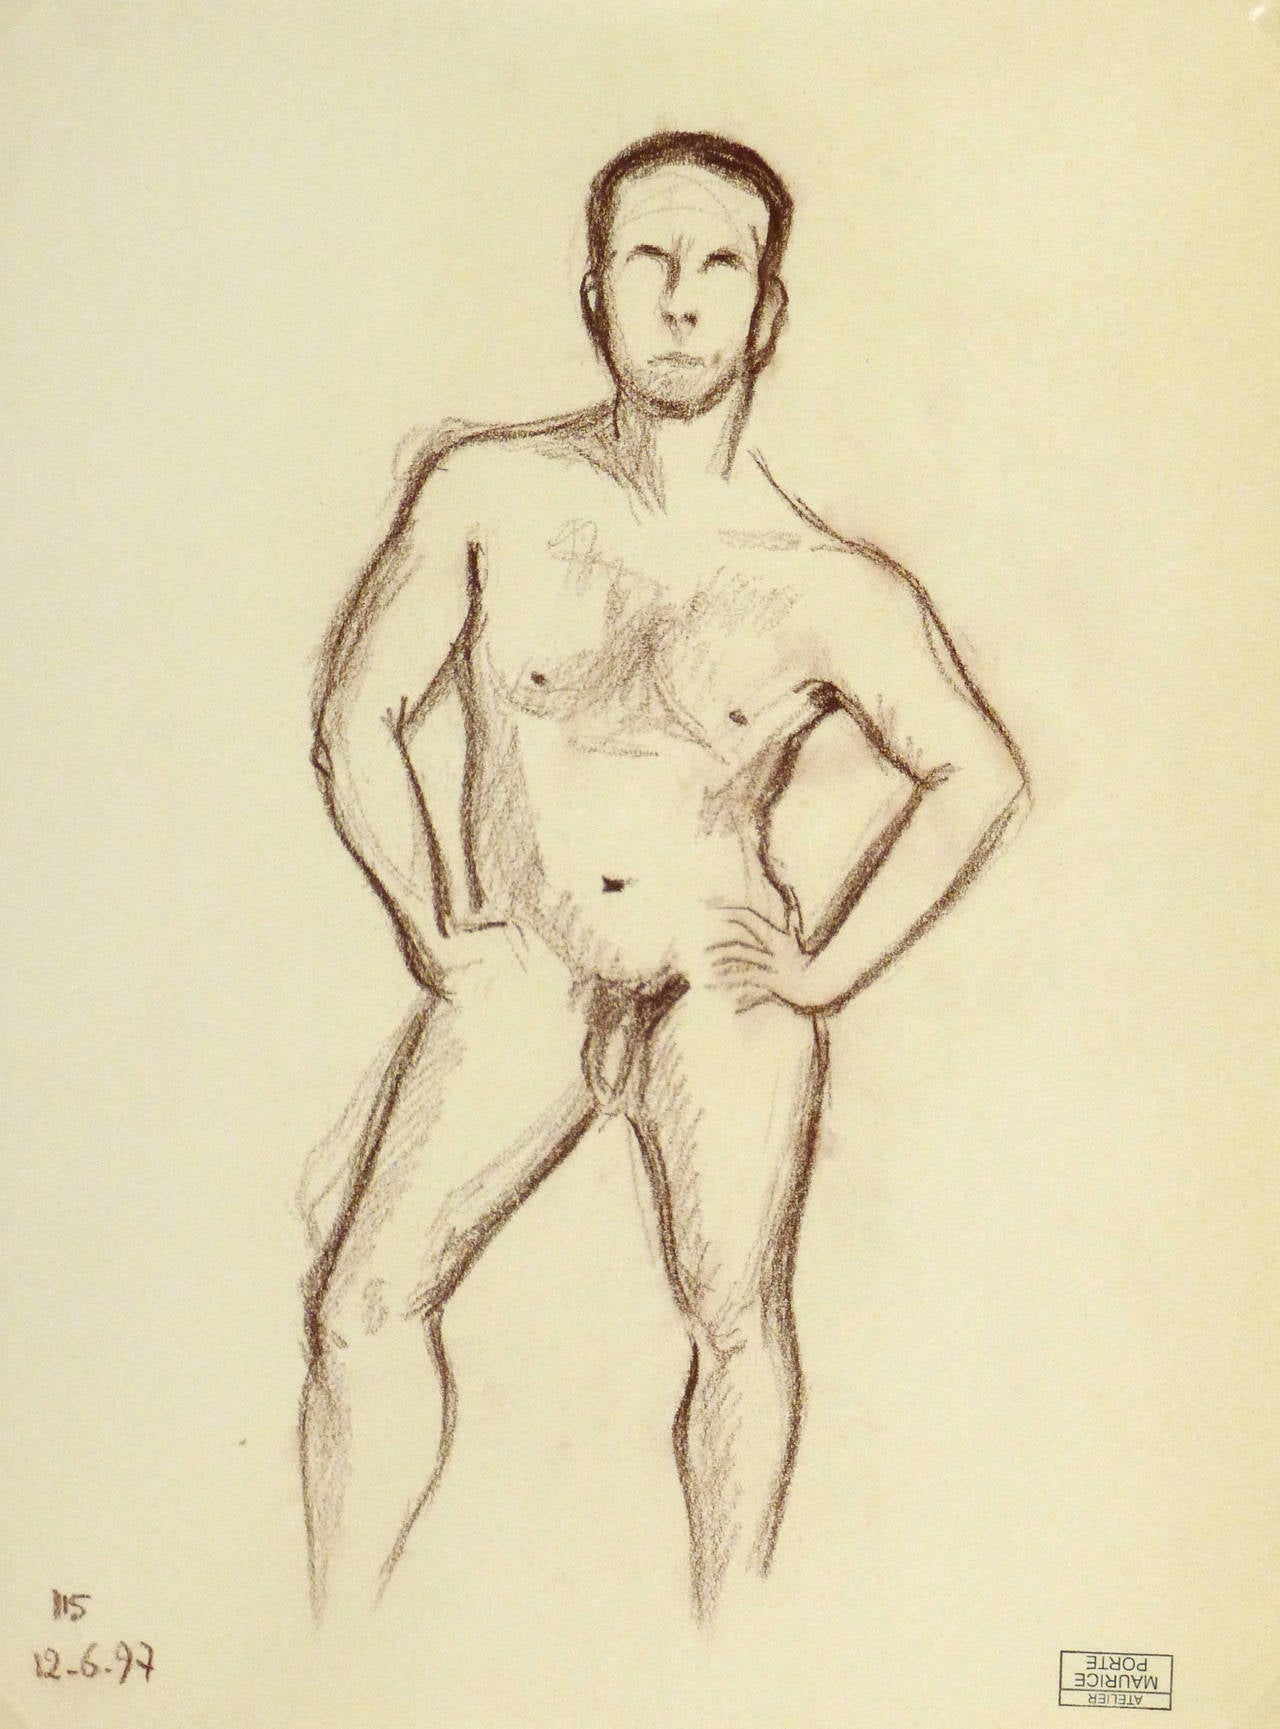 French Charcoal Sketch - Nude Male - Art by Maurice Porte